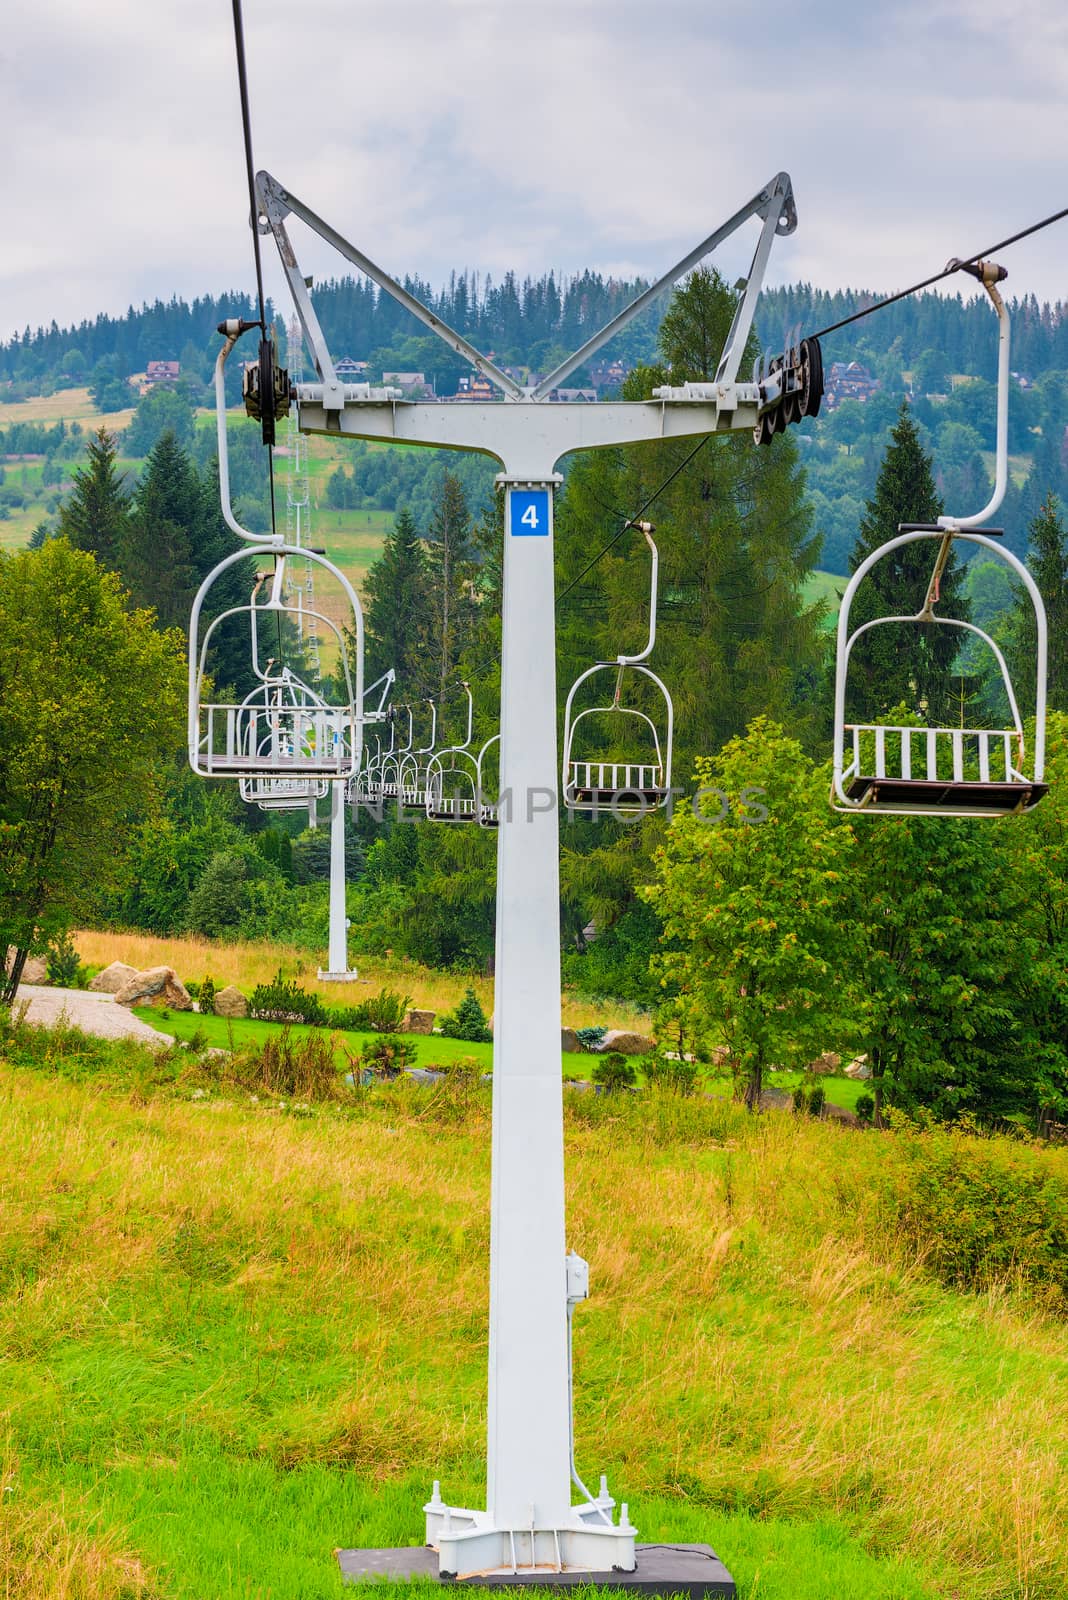 support of the seat lift vertical image in the mountains